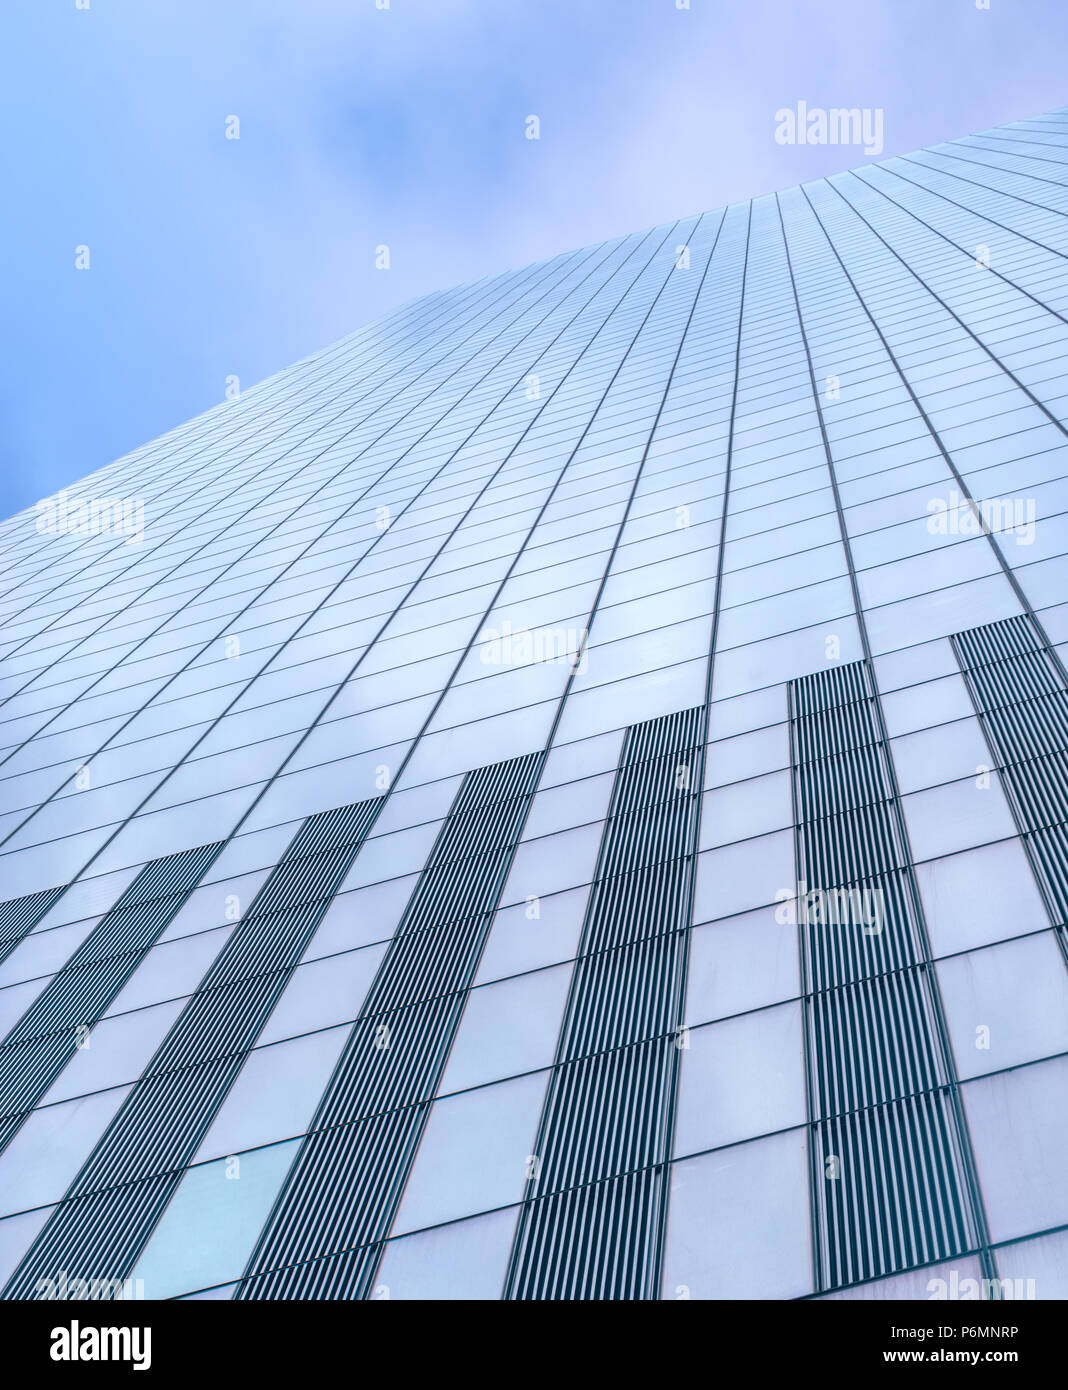 Looking up at a of glass clad skyscaper against a blue sky in Manhattan, New York City Stock Photo